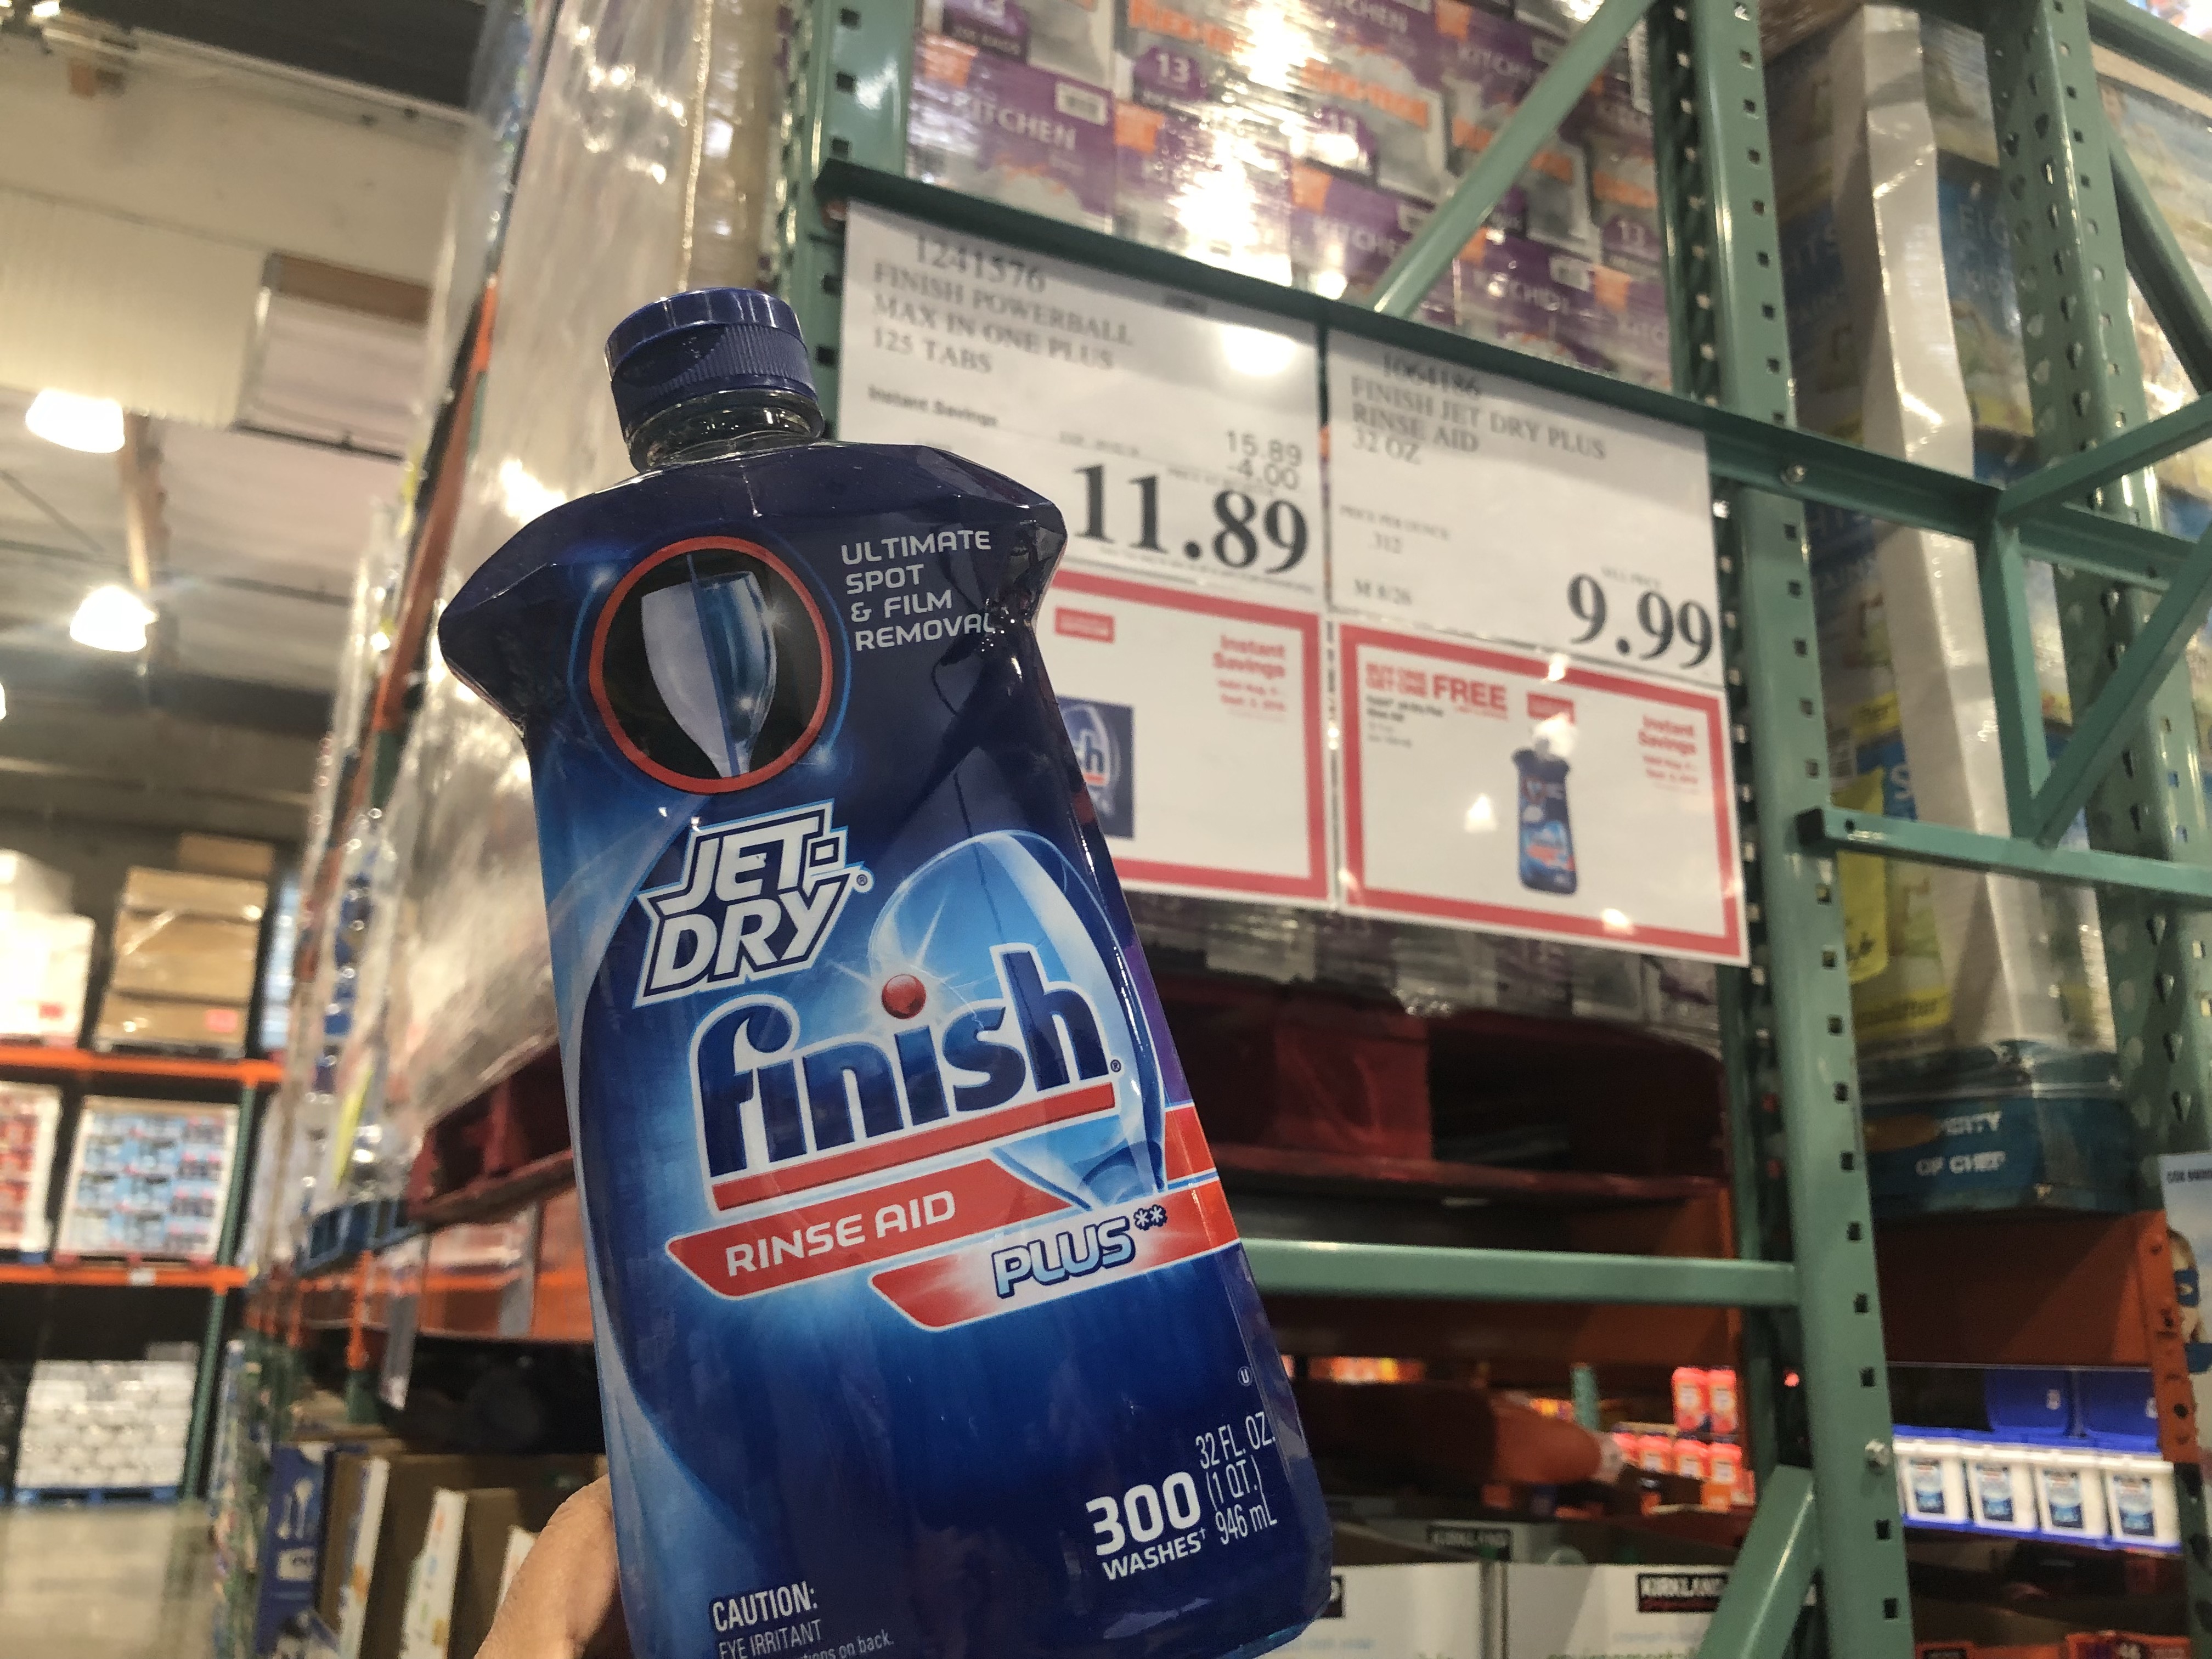 Costco: Finish Jet-Dry Rinse Aid LARGE 32 Ounce Bottles ONLY $4.99 Each +  More